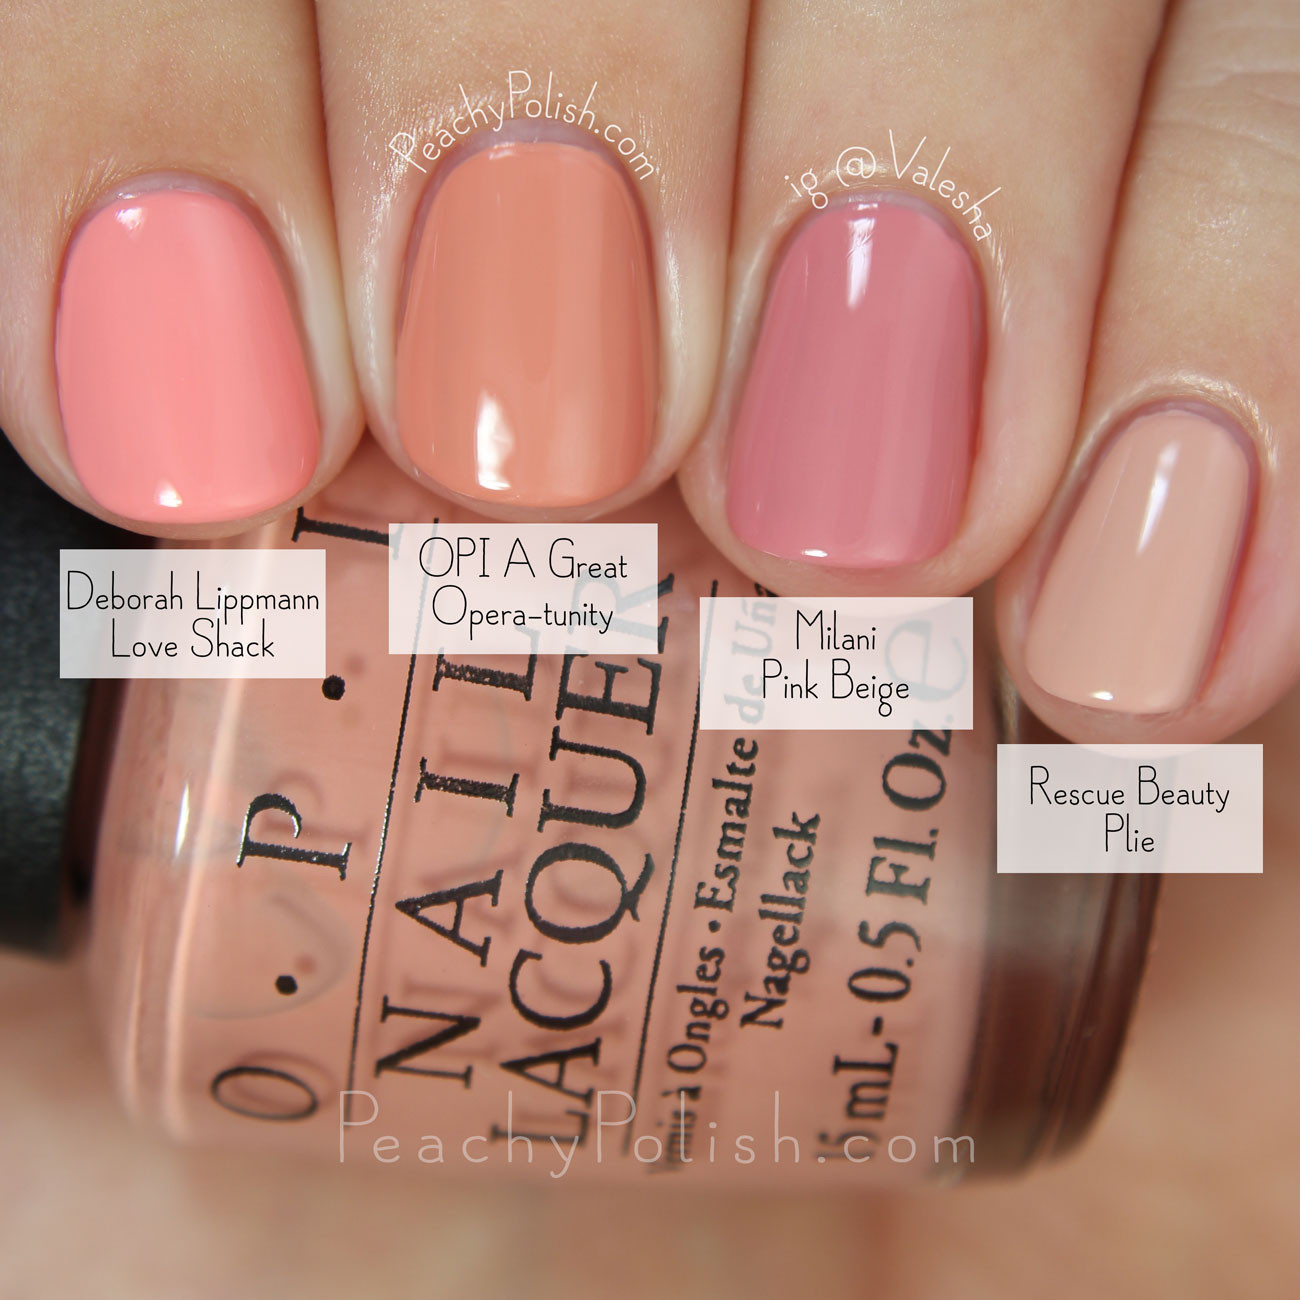 Great Nail Colors
 OPI Fall 2015 Venice Collection parisons Peachy Polish